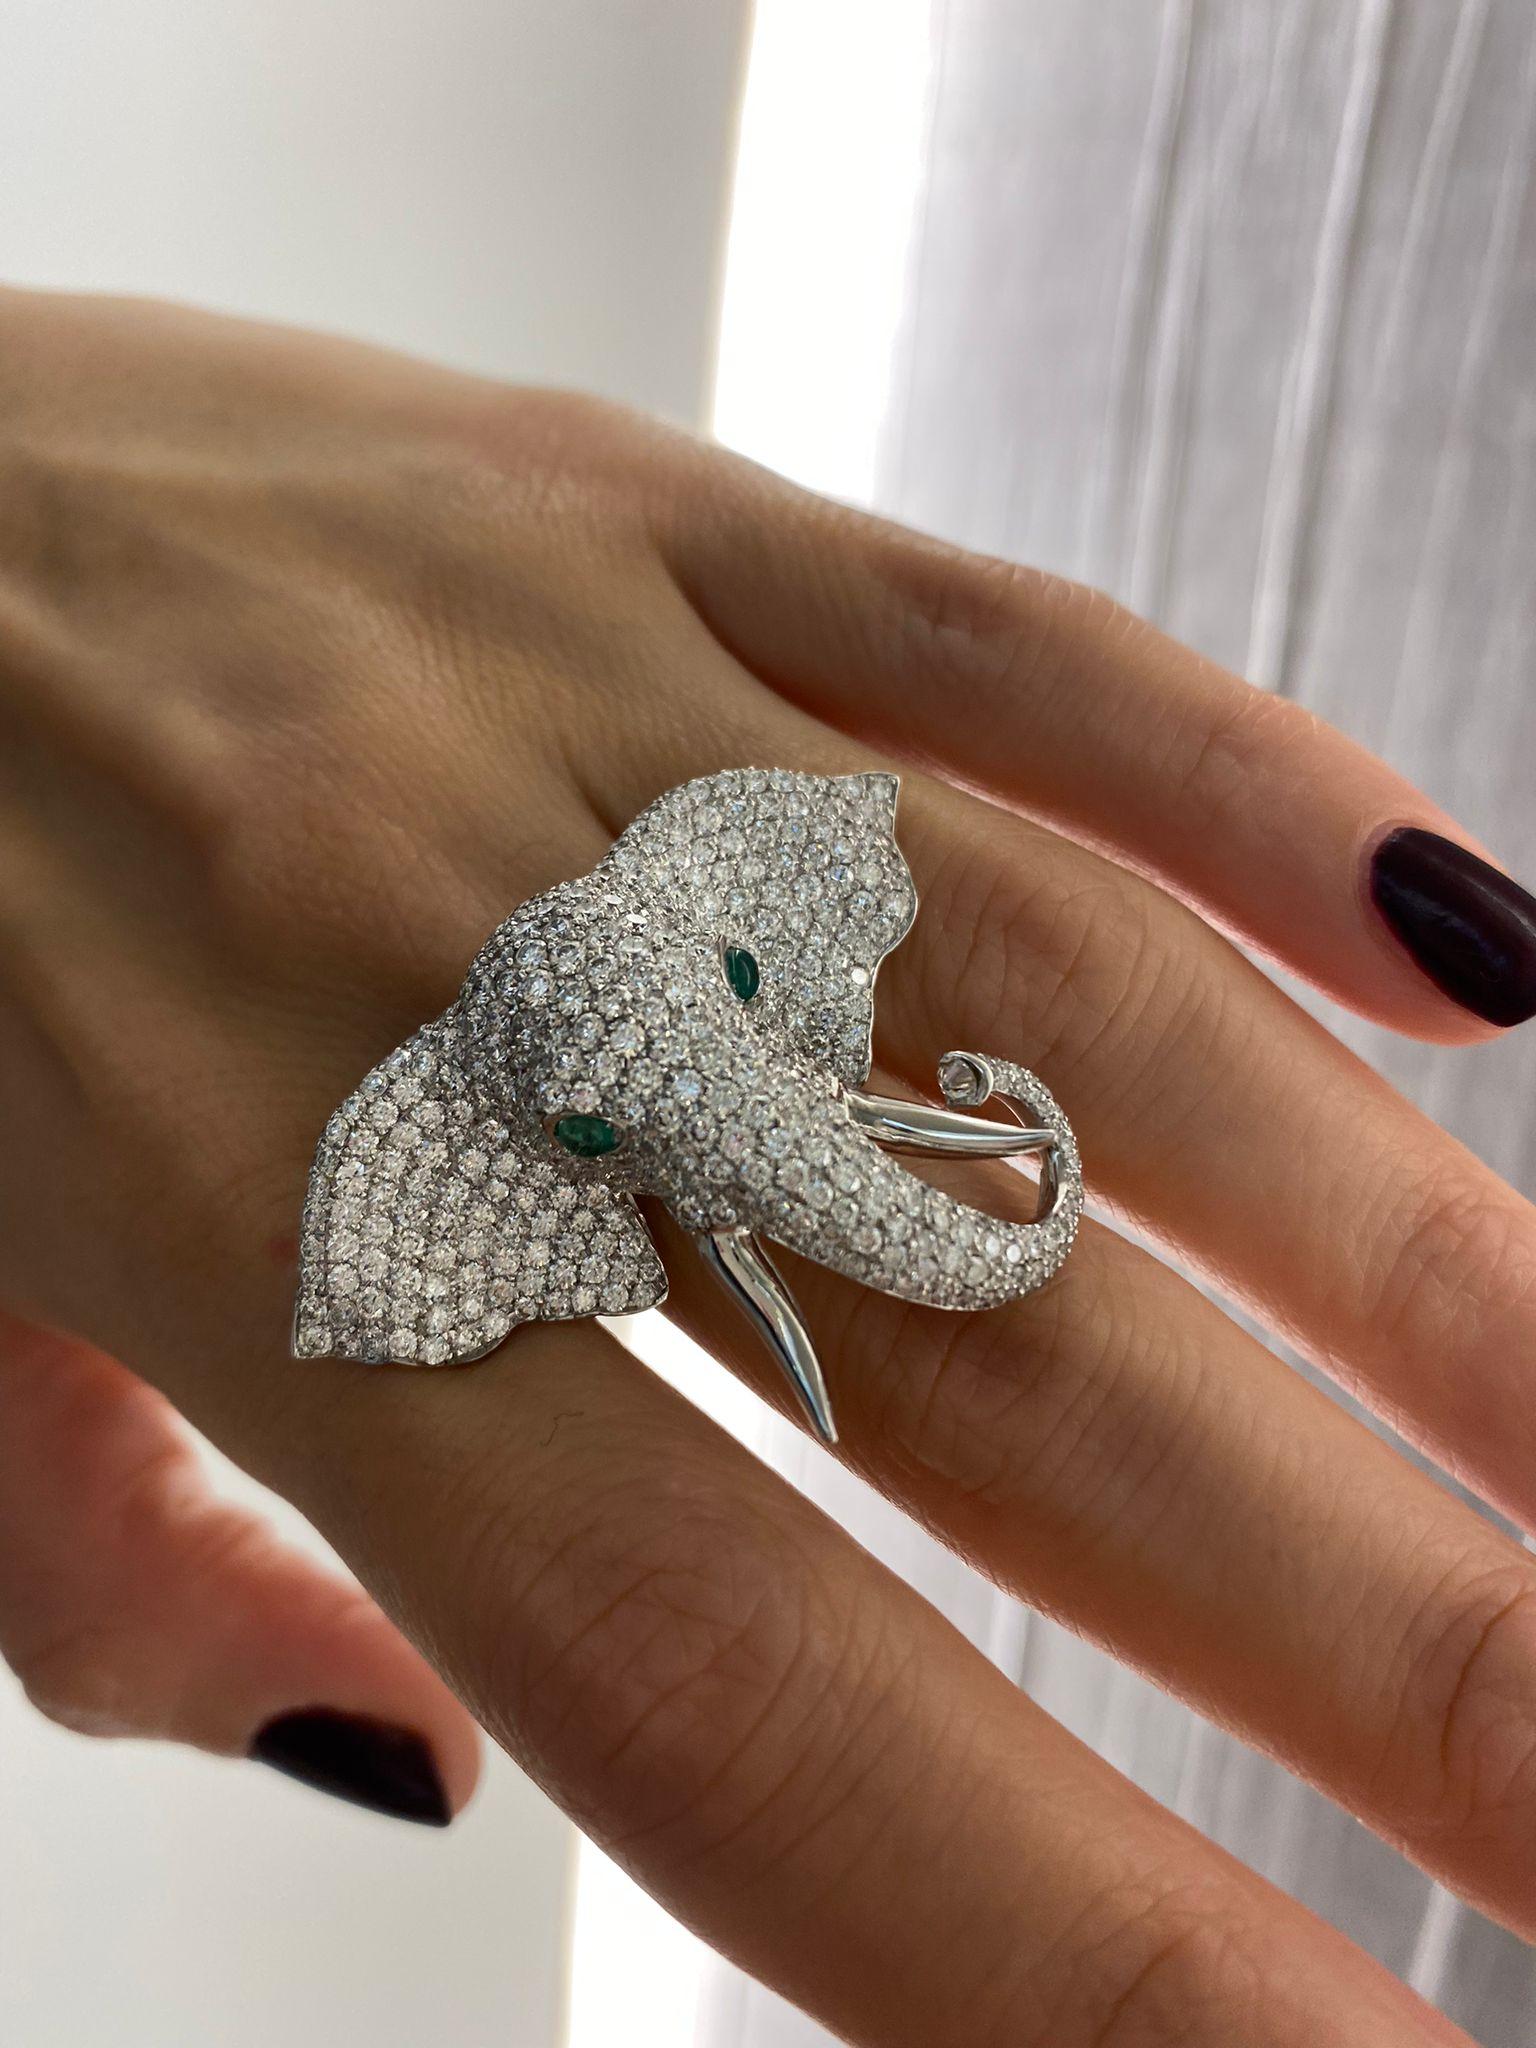 Monan Another World 5.78 Carat Diamond Elephant Ring In New Condition For Sale In Istanbul, TR